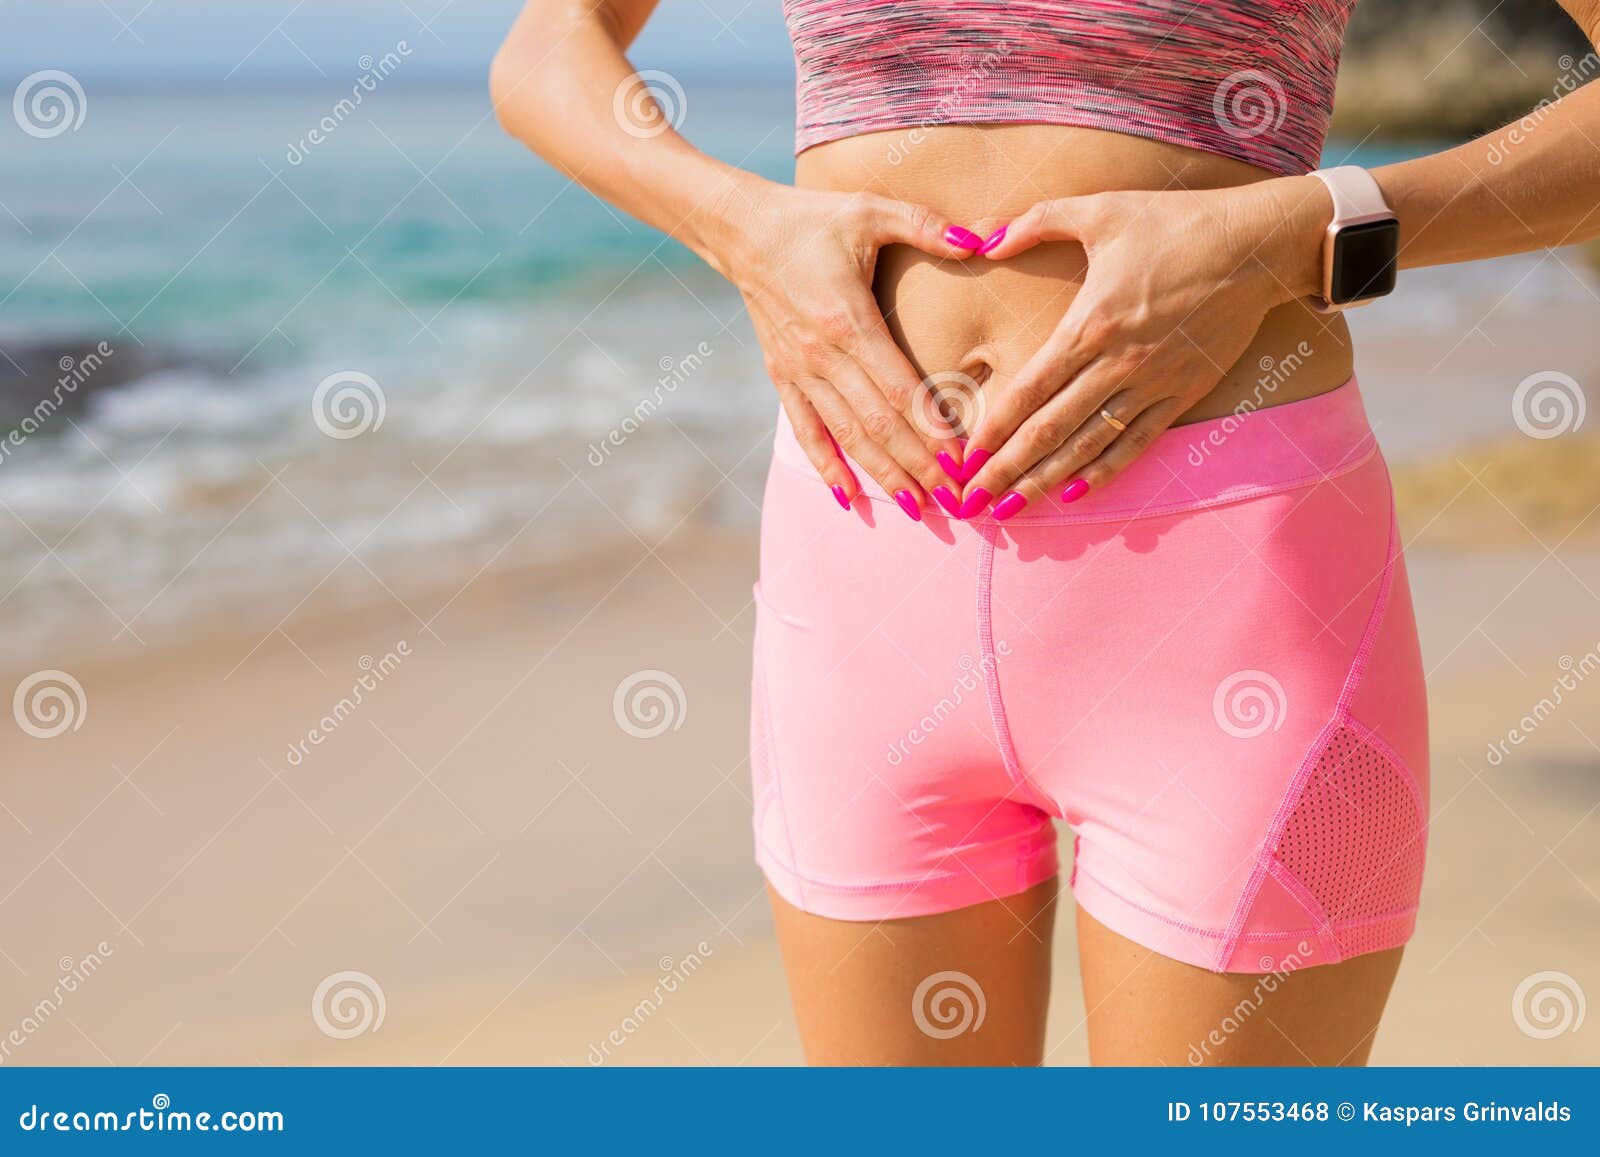 fit woman showing hands heart sign on her stomach